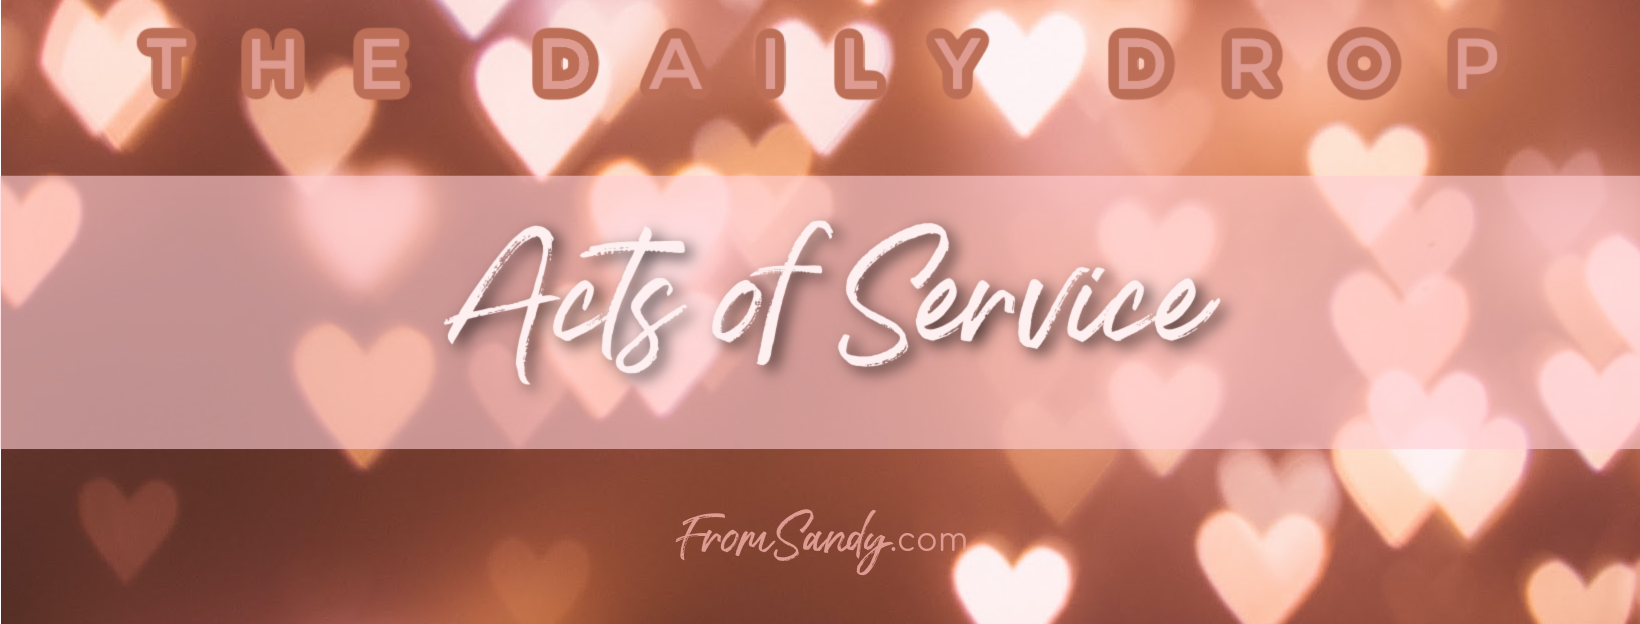 Acts of Service, From Sandy